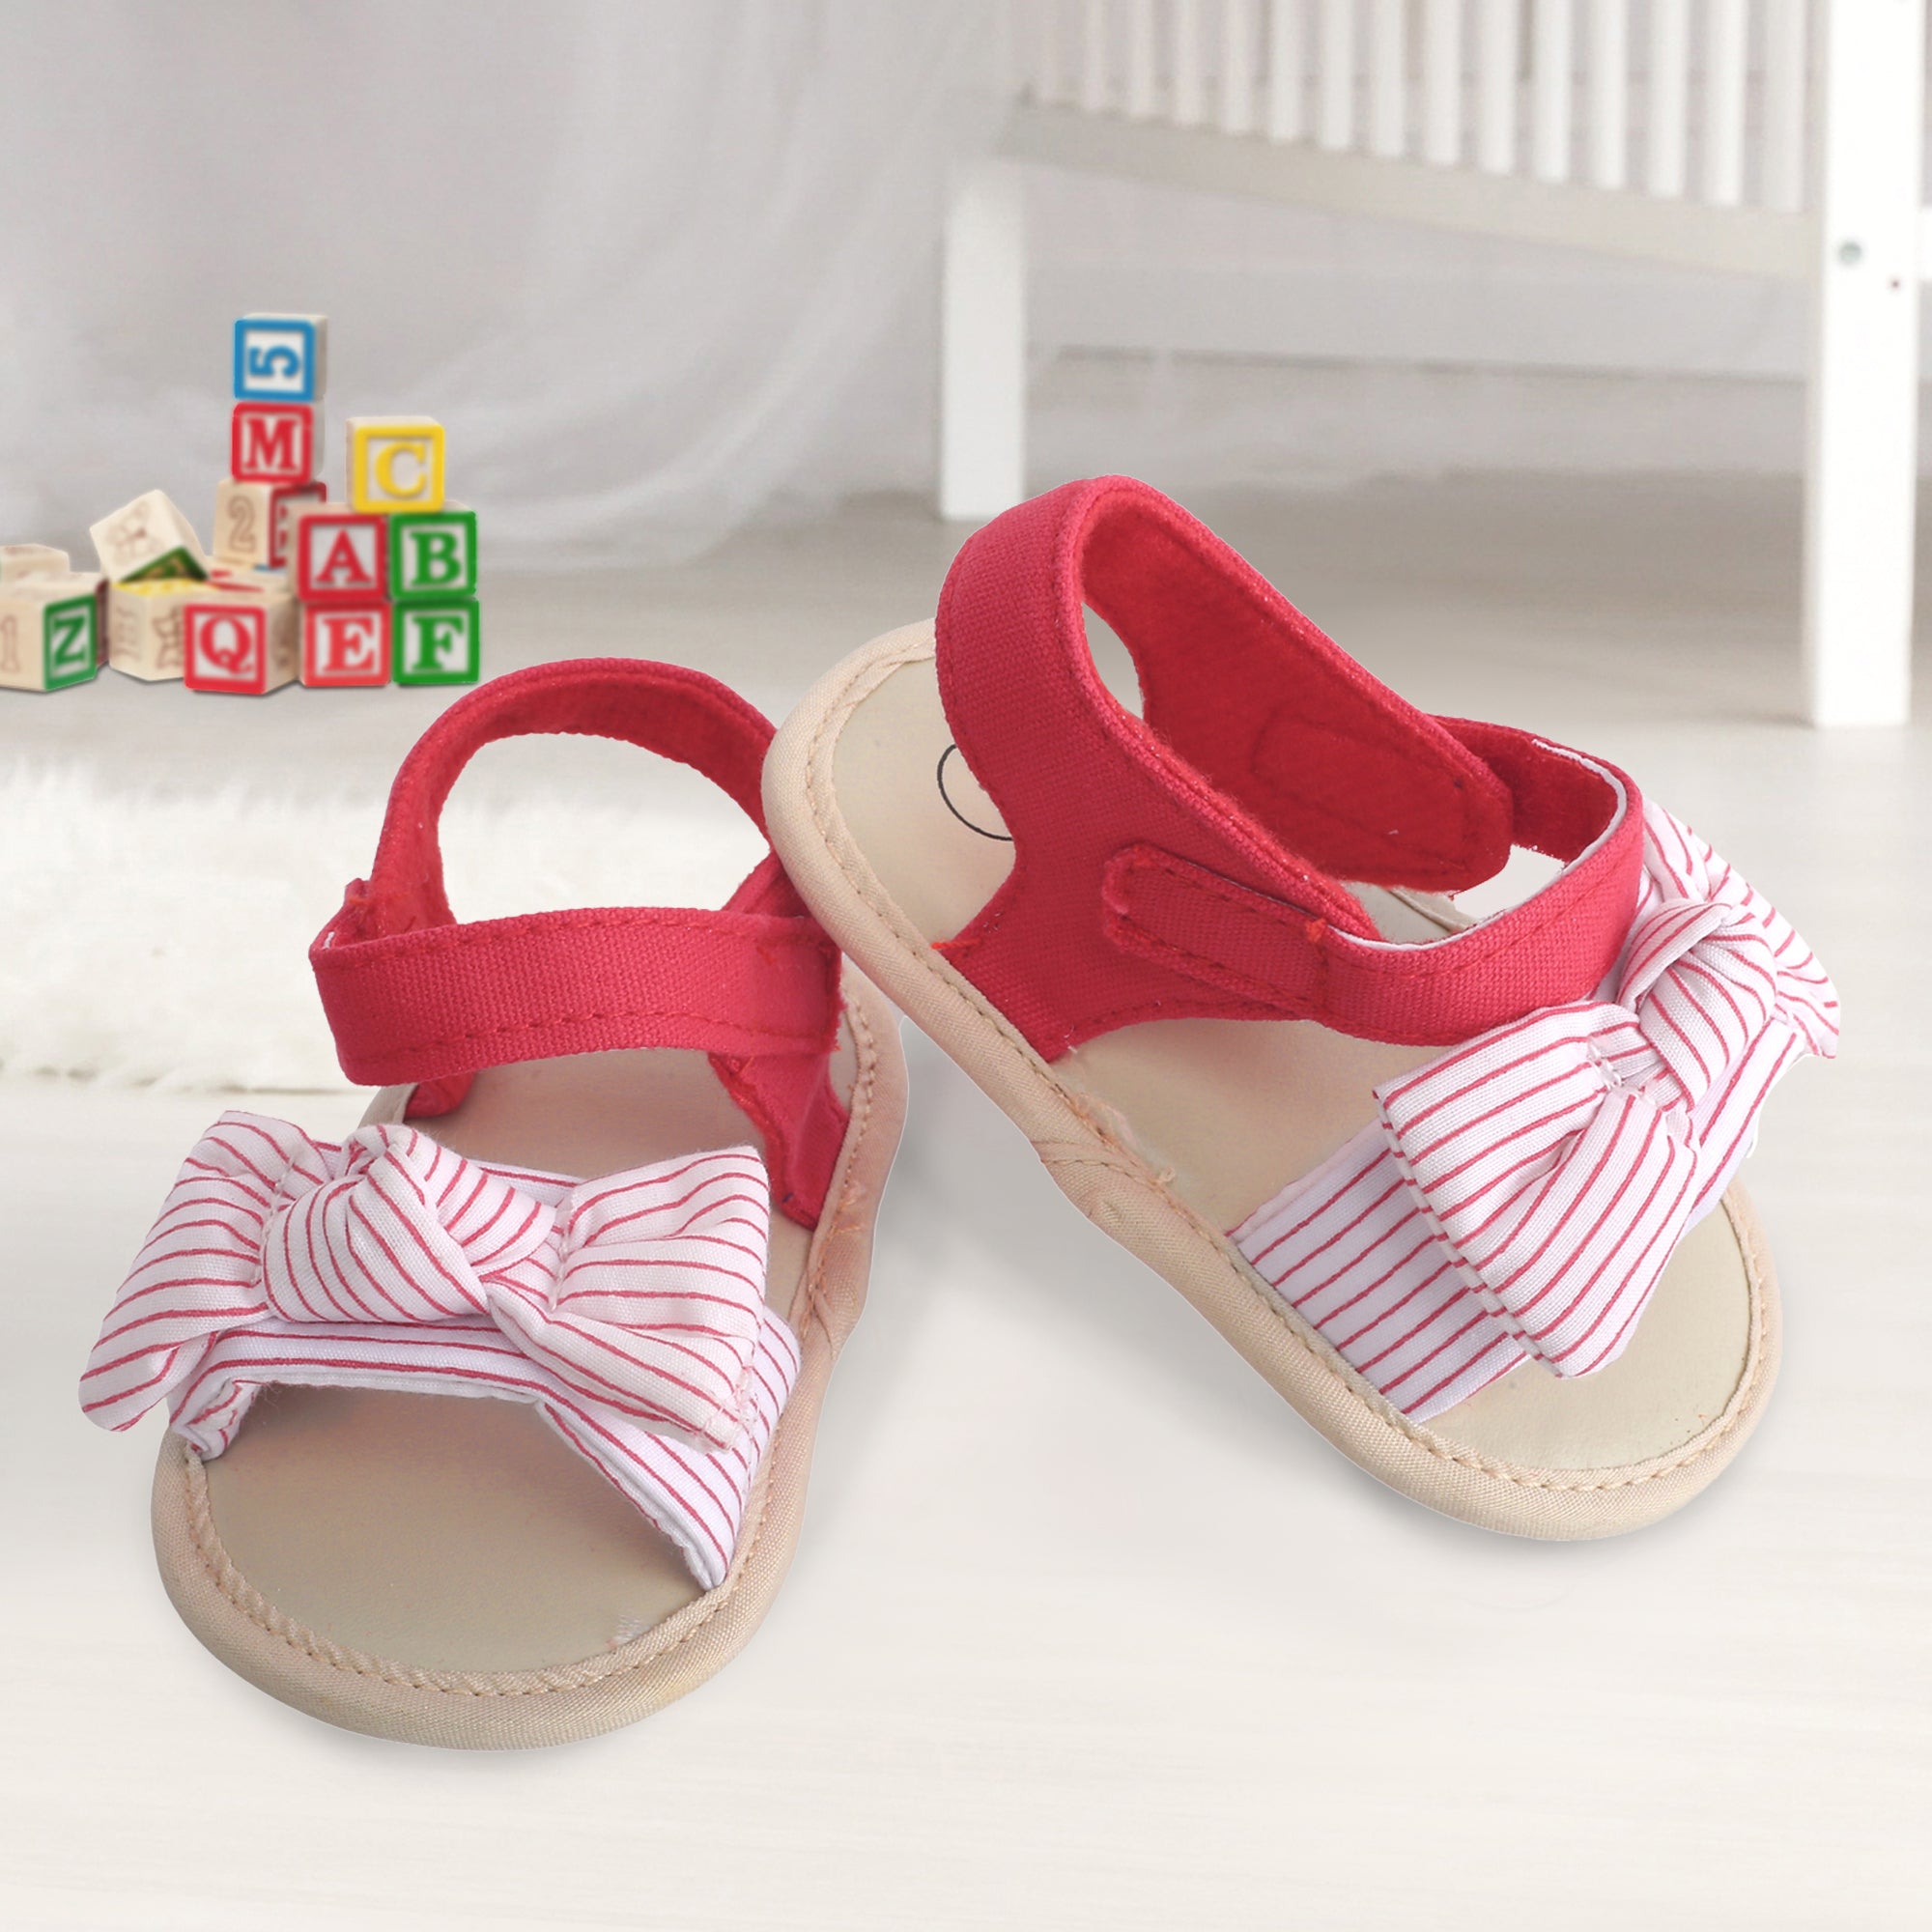 Baby Moo Striped Red Booties - Baby Moo